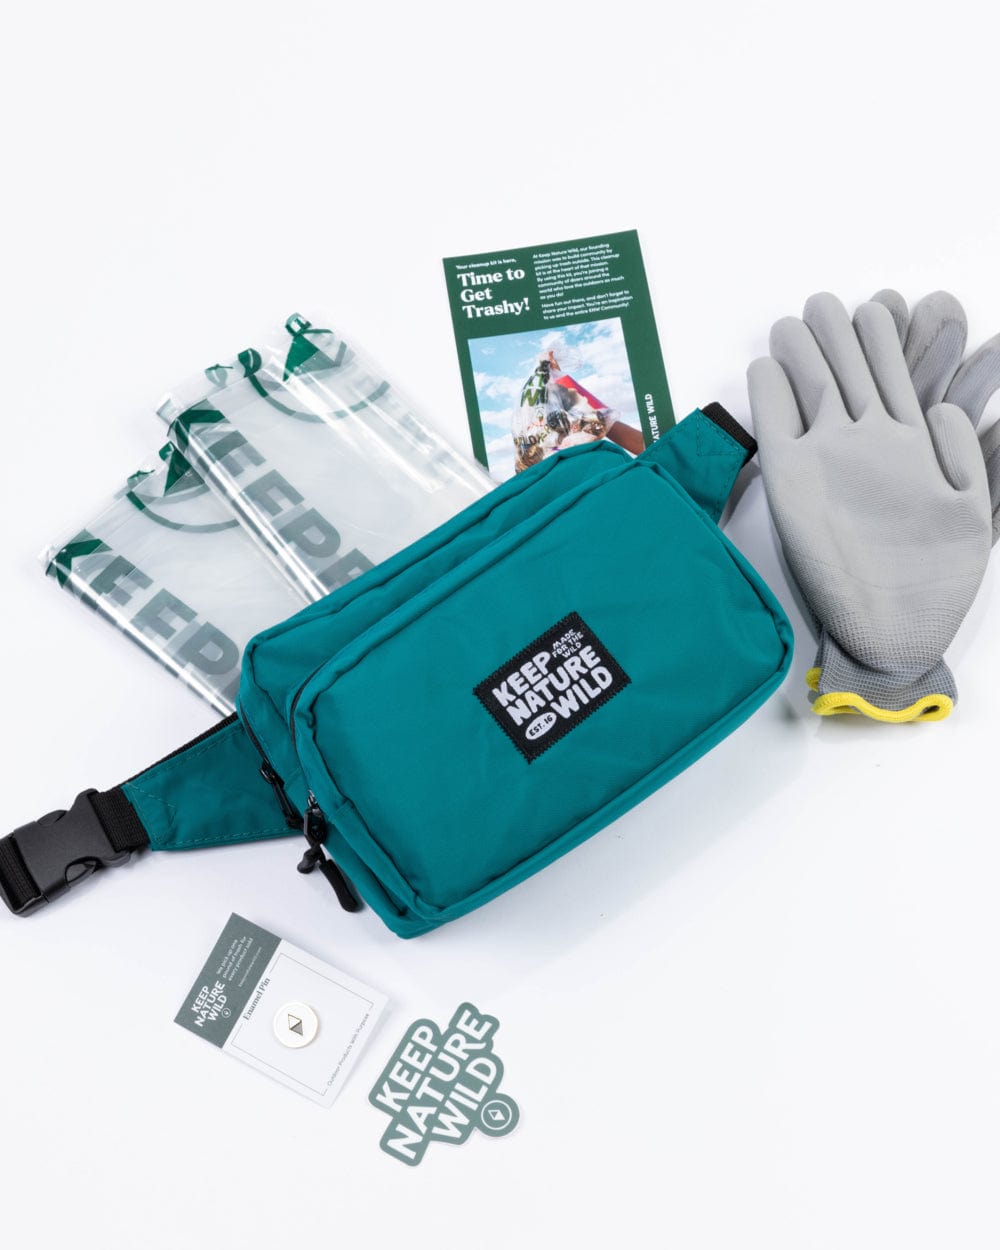 Keep Nature Wild Cleanup Kit Standard Fanny Pack Cleanup Kit | Teal